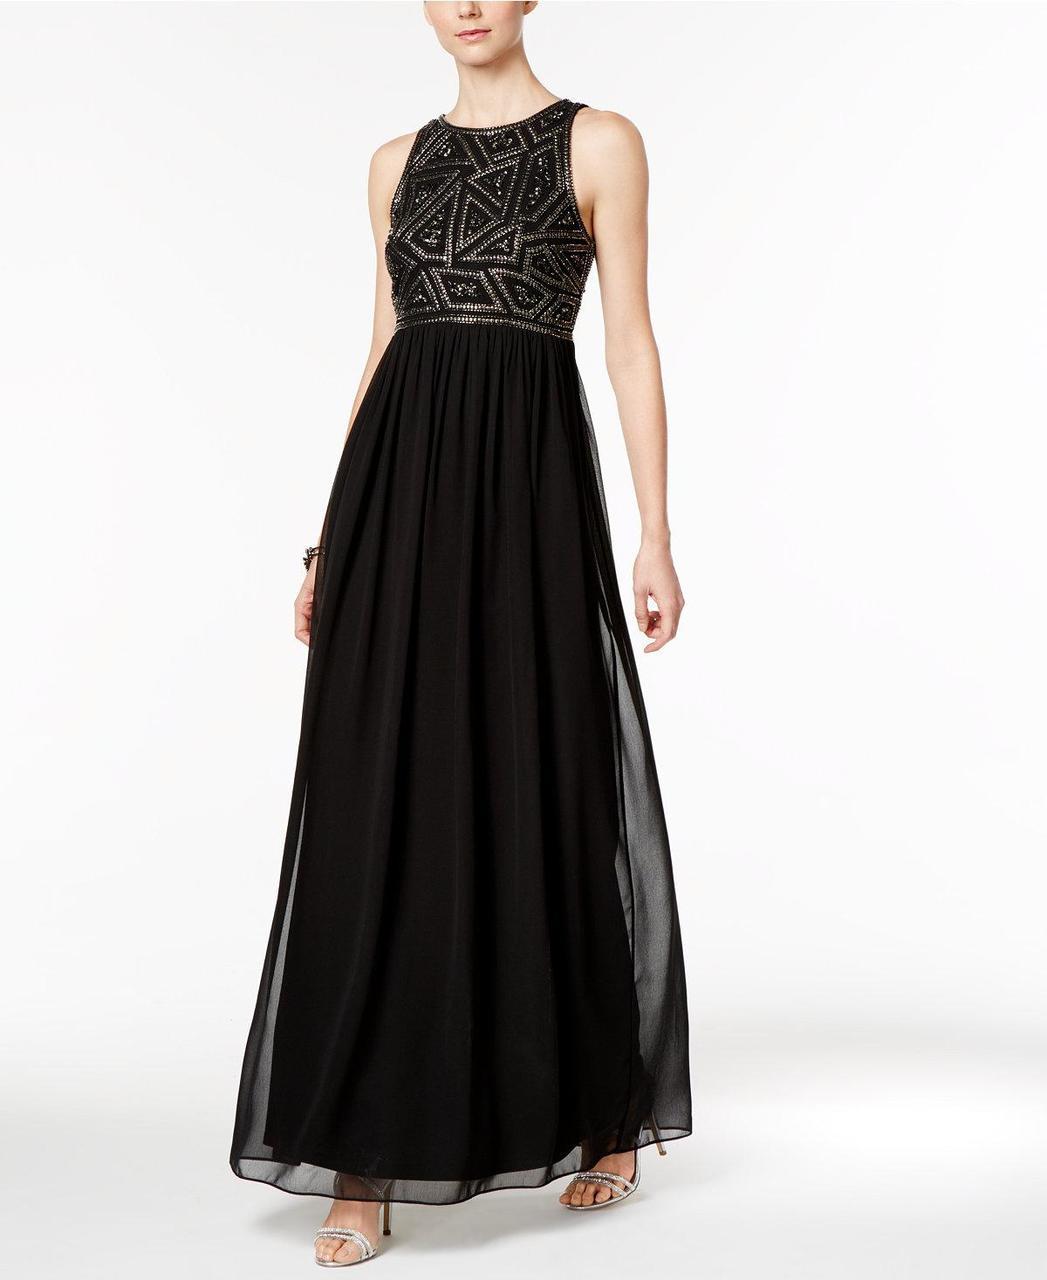 Adrianna Papell - 191910790 Embellished Jewel Ruched Gown in Black